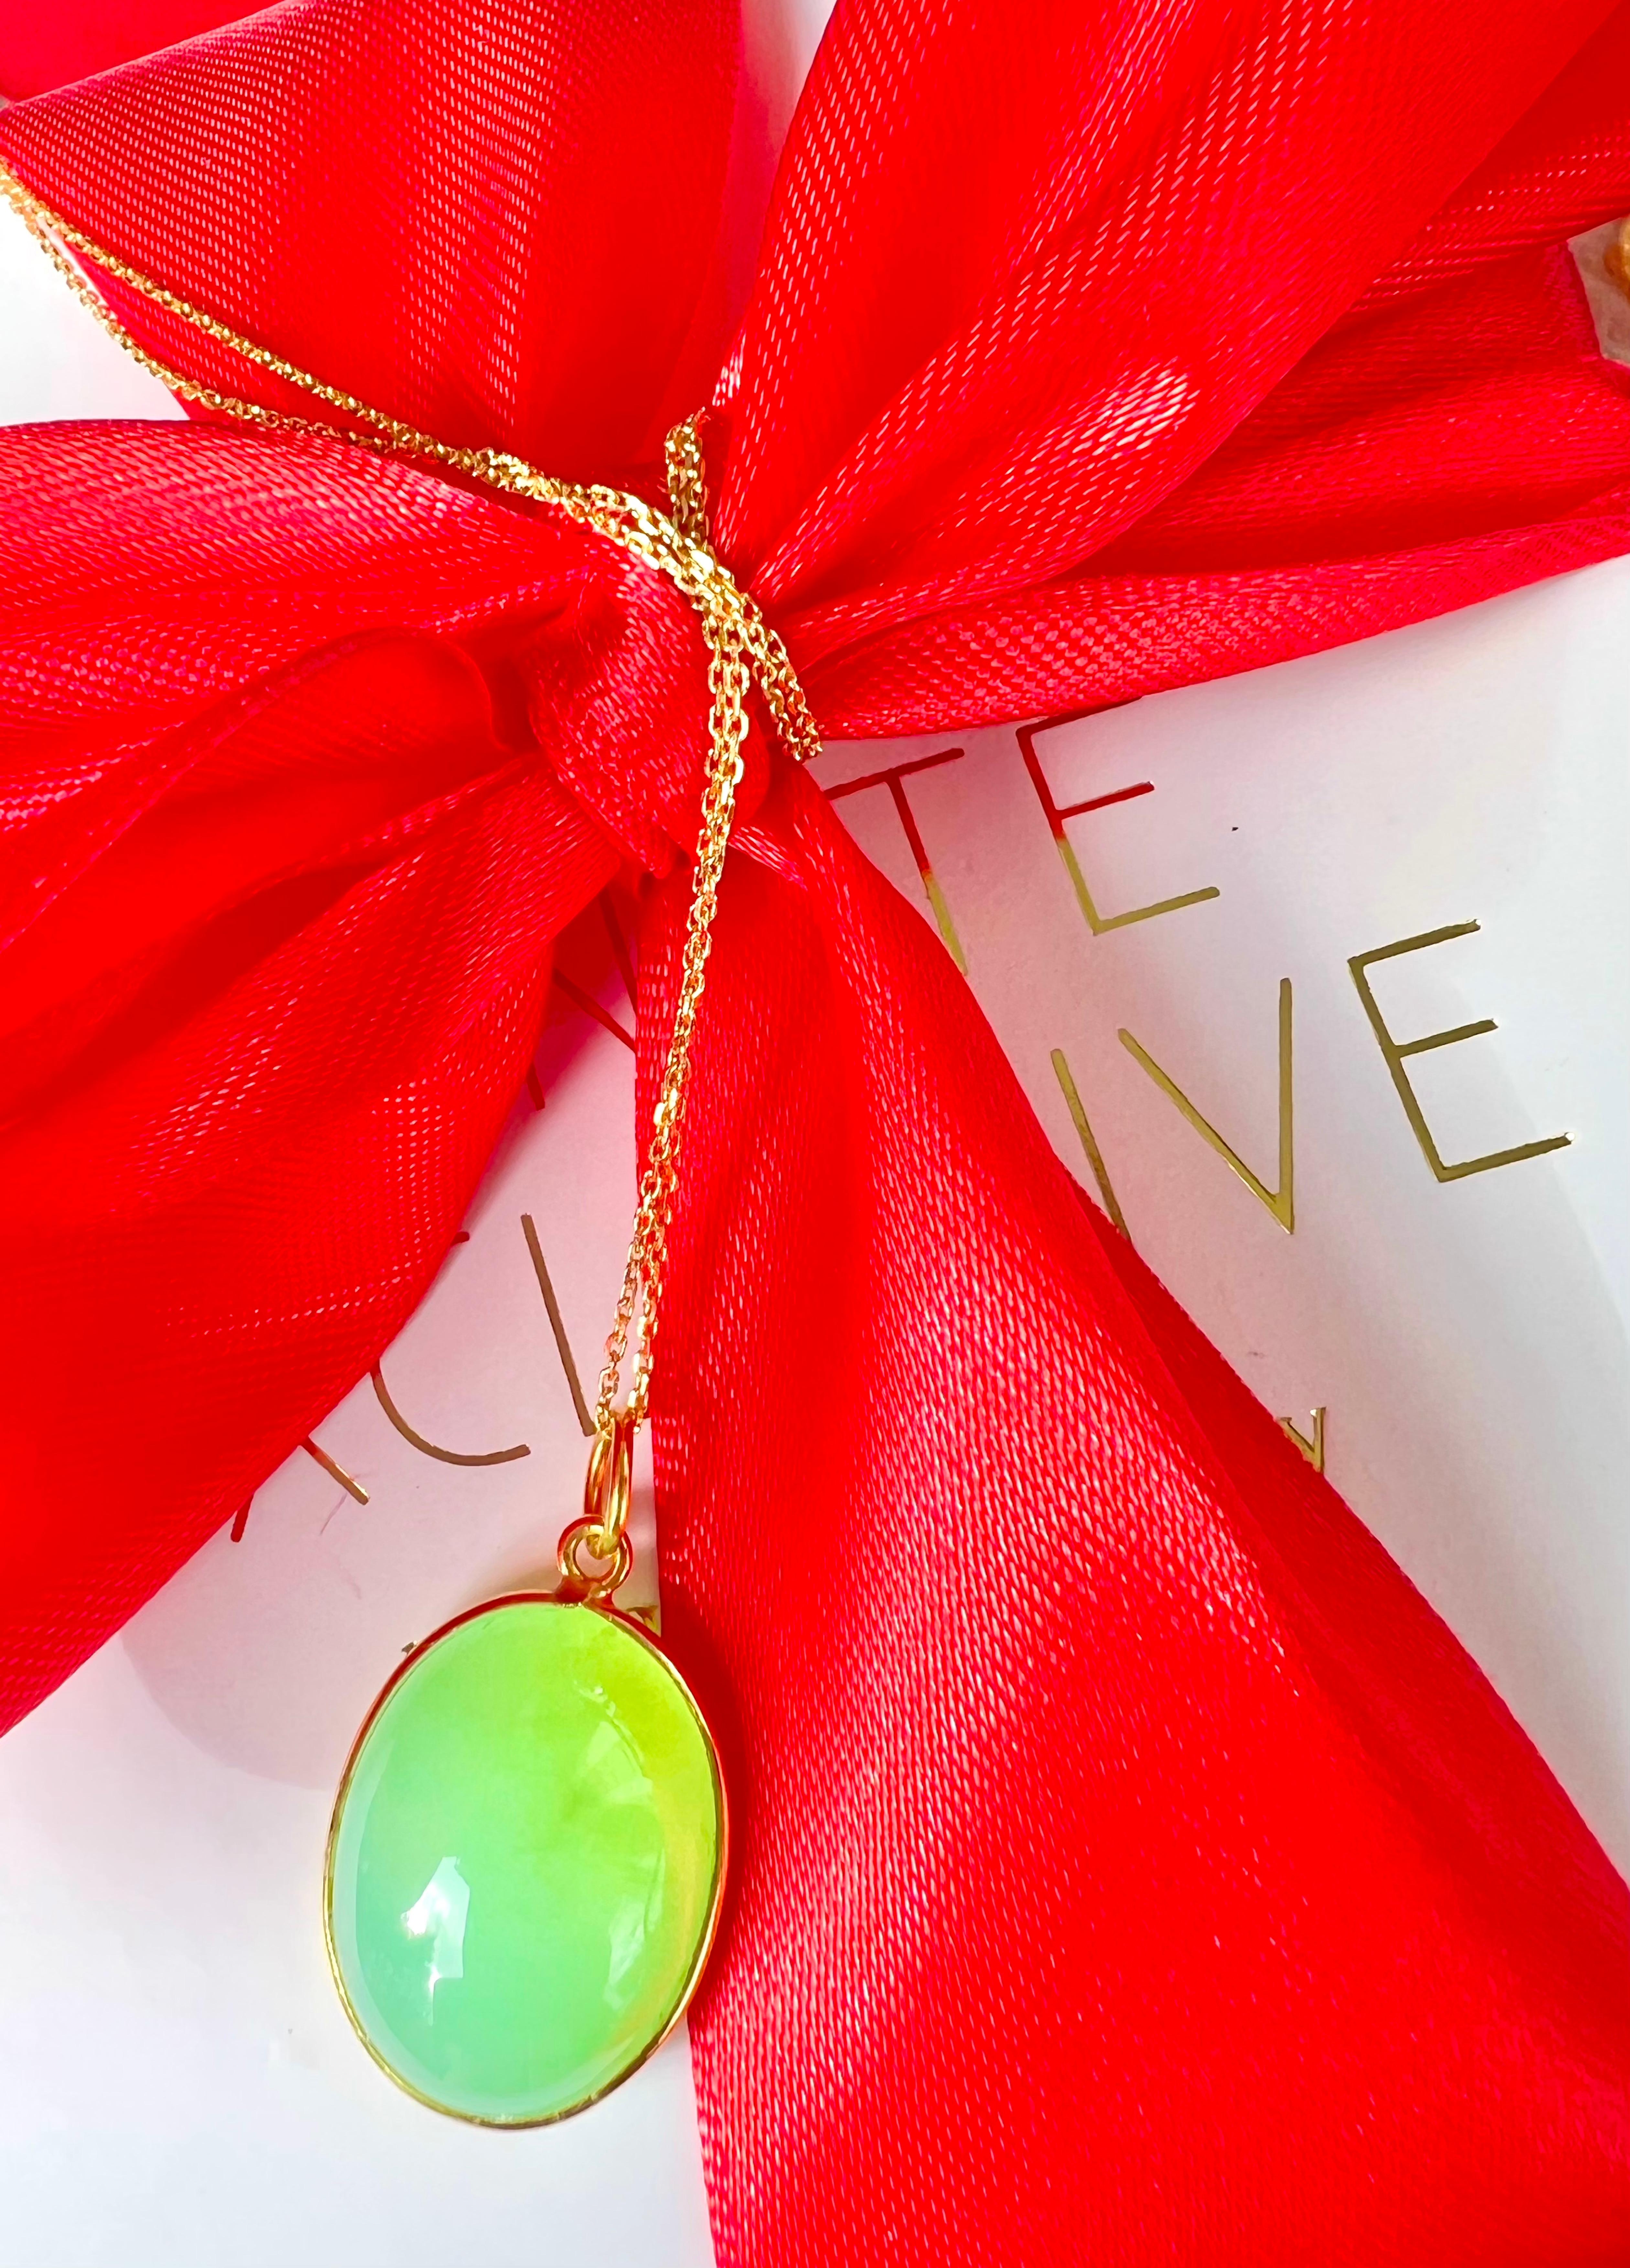 
Old Stock Australian Chrysoprase Oval Bezel Pendant necklace has the slogan - simple is elegant! This green color is divine and the pendant itself has a glossy shine that looks extremely cute. The total length is 16 inches long.
18K Solid Yellow